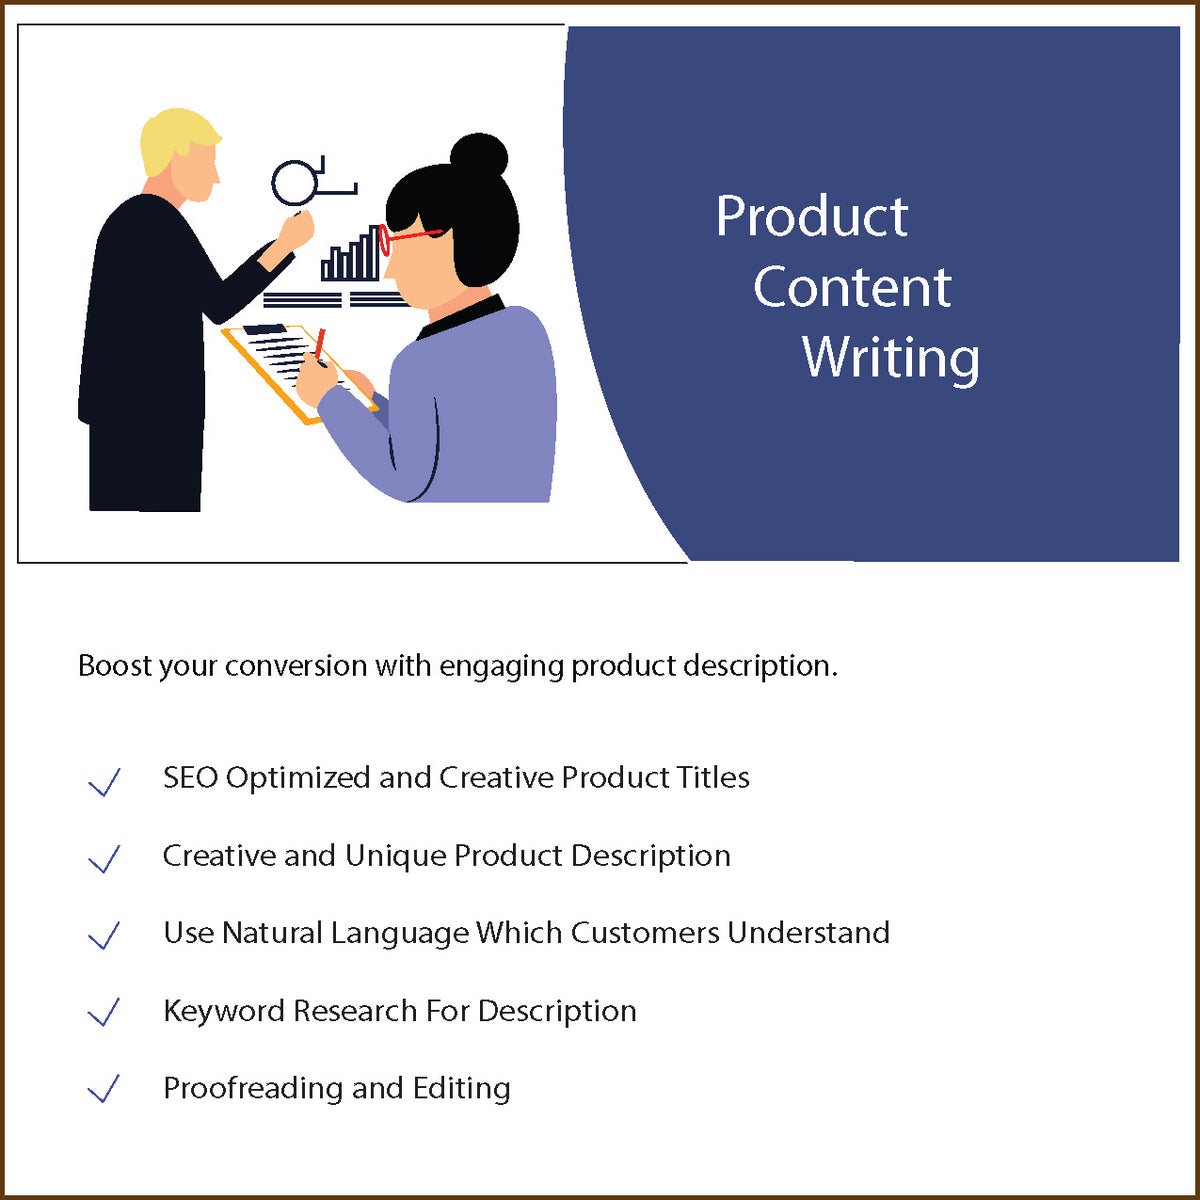 Product Content Writing